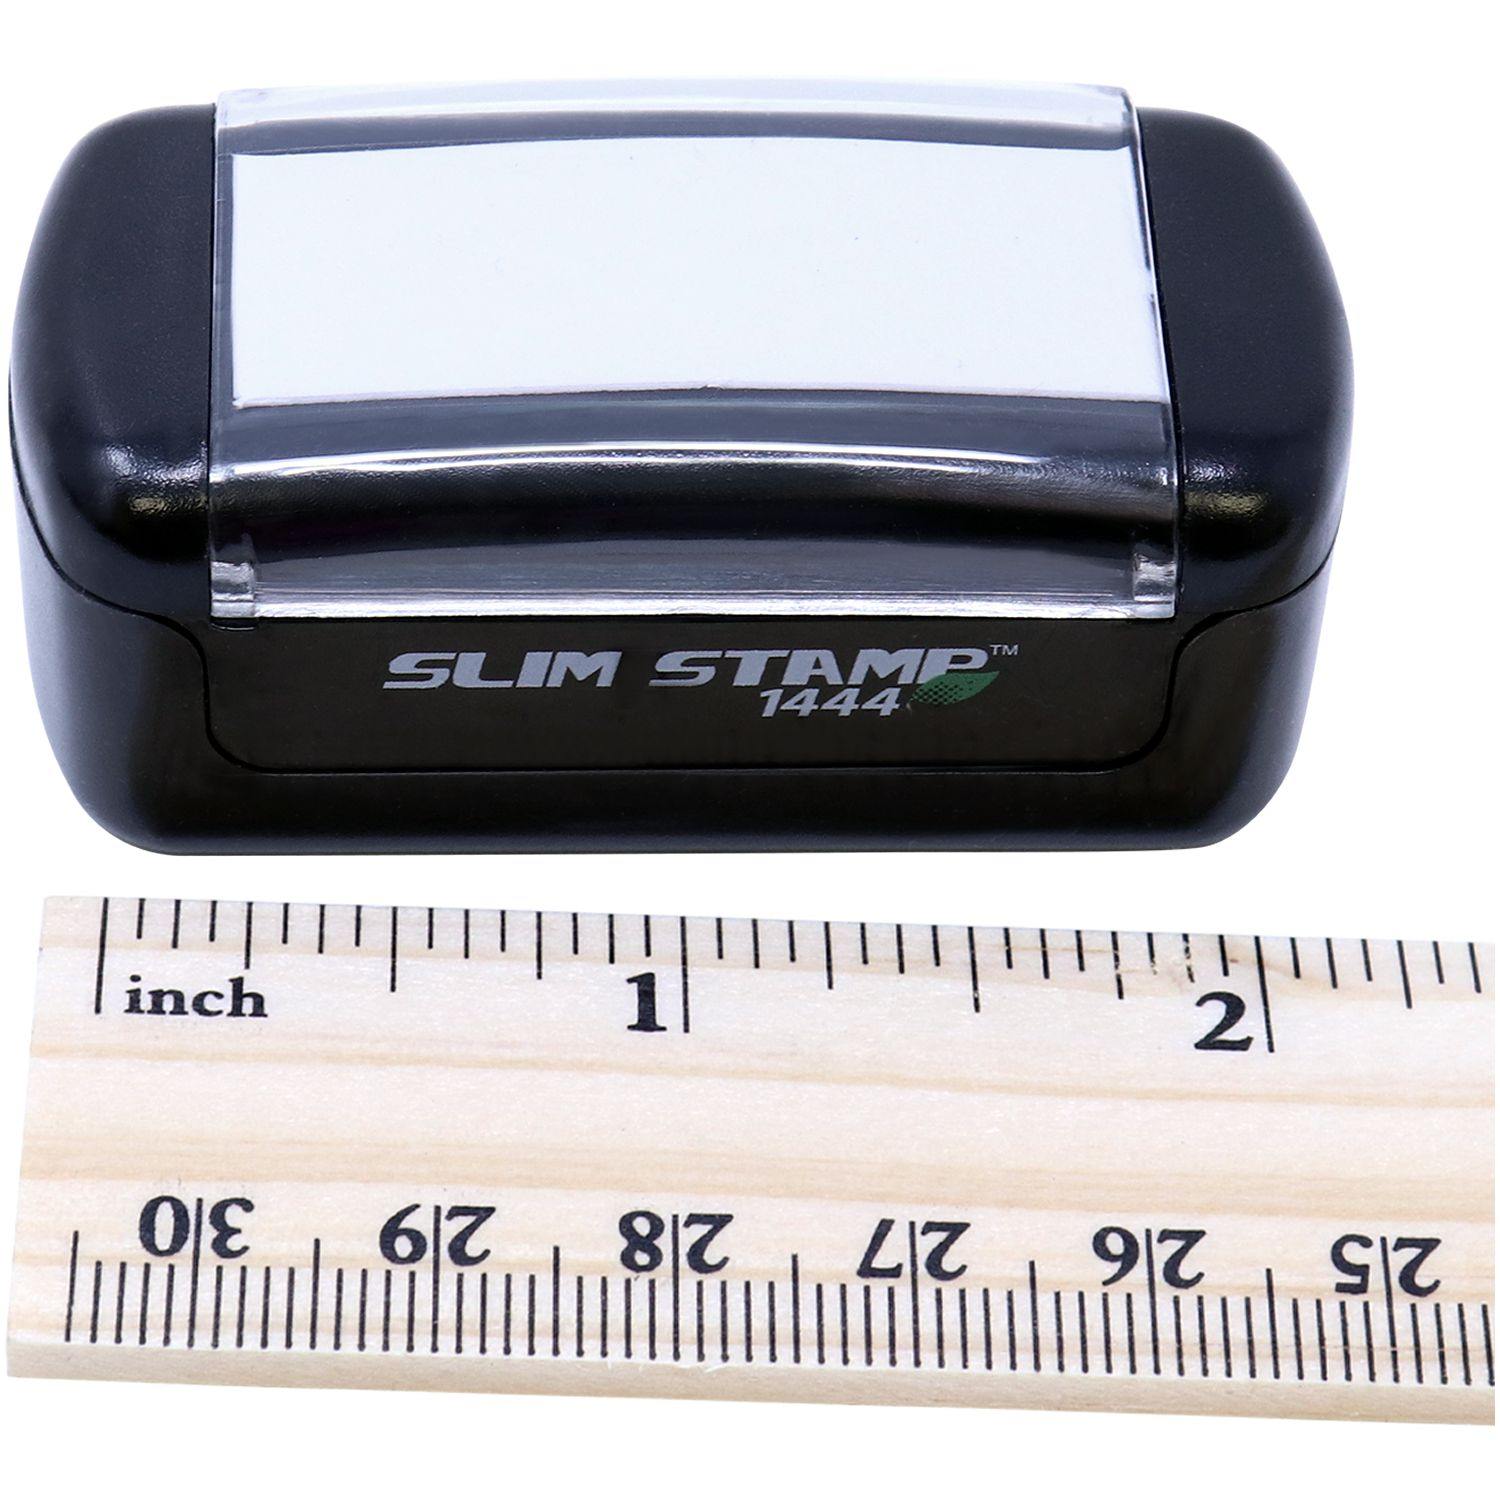 Measurement Slim Pre-Inked Two Thumbs Up with Thumb Icon Stamp with Ruler